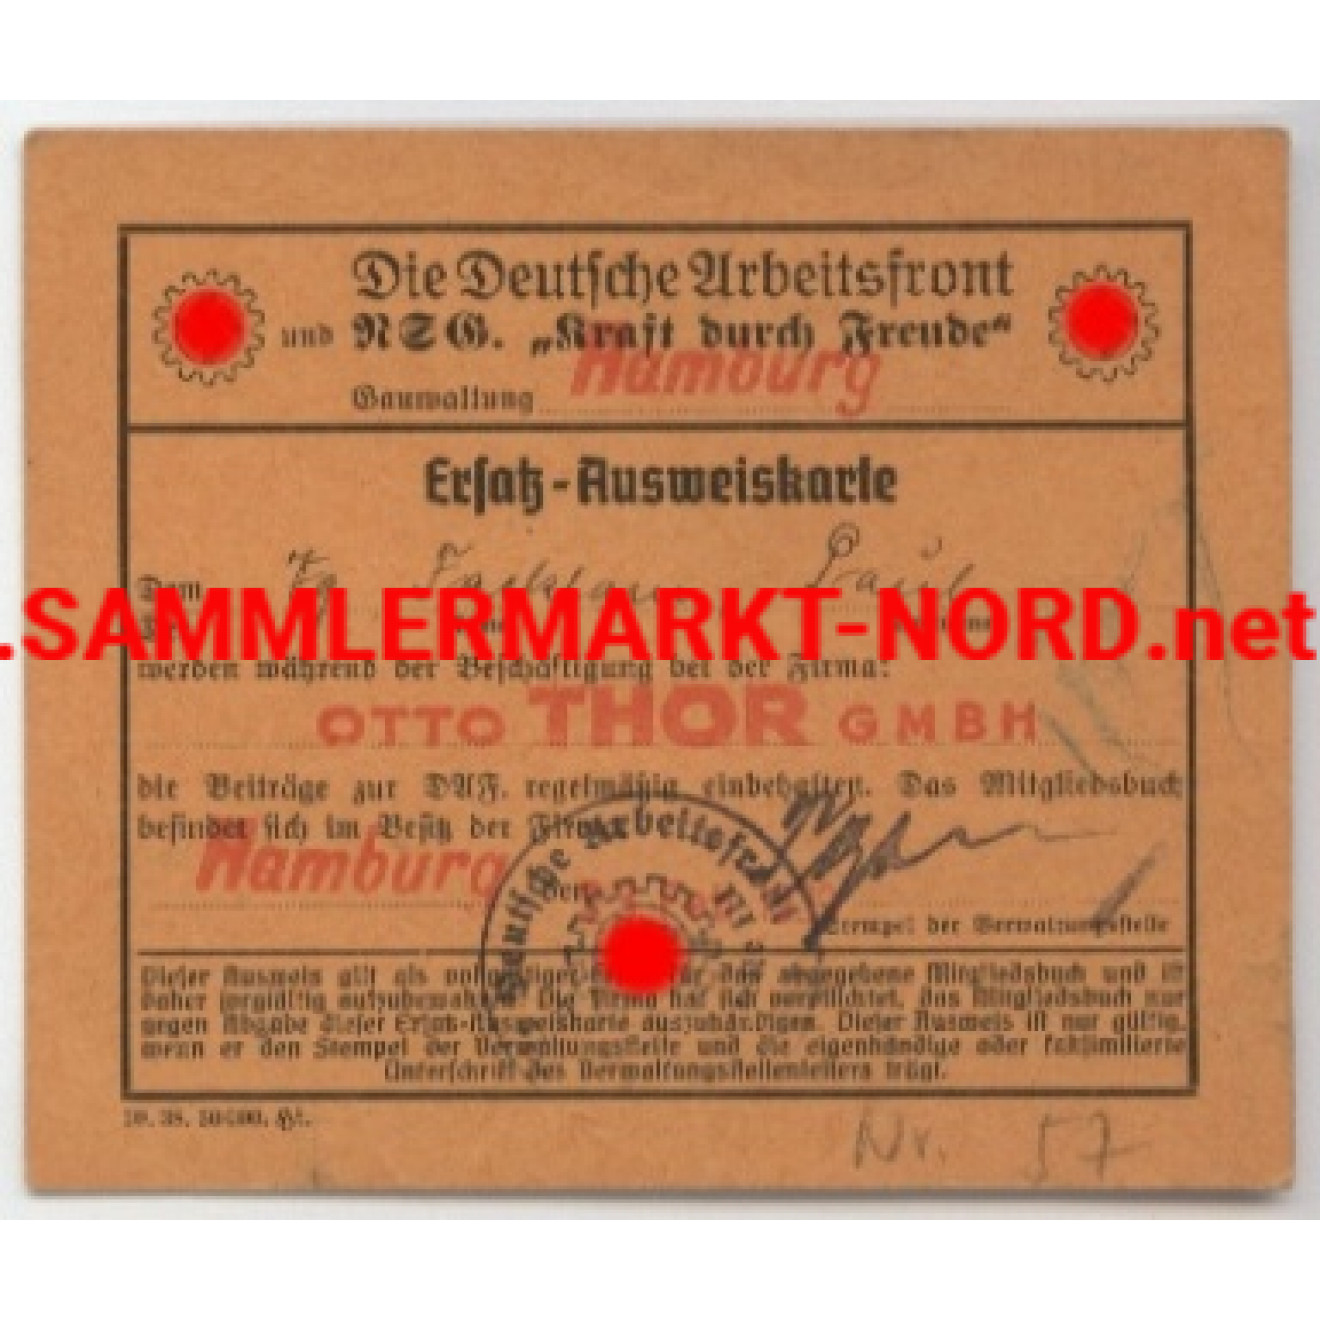 Replacement identity card of the Arbeitsfront